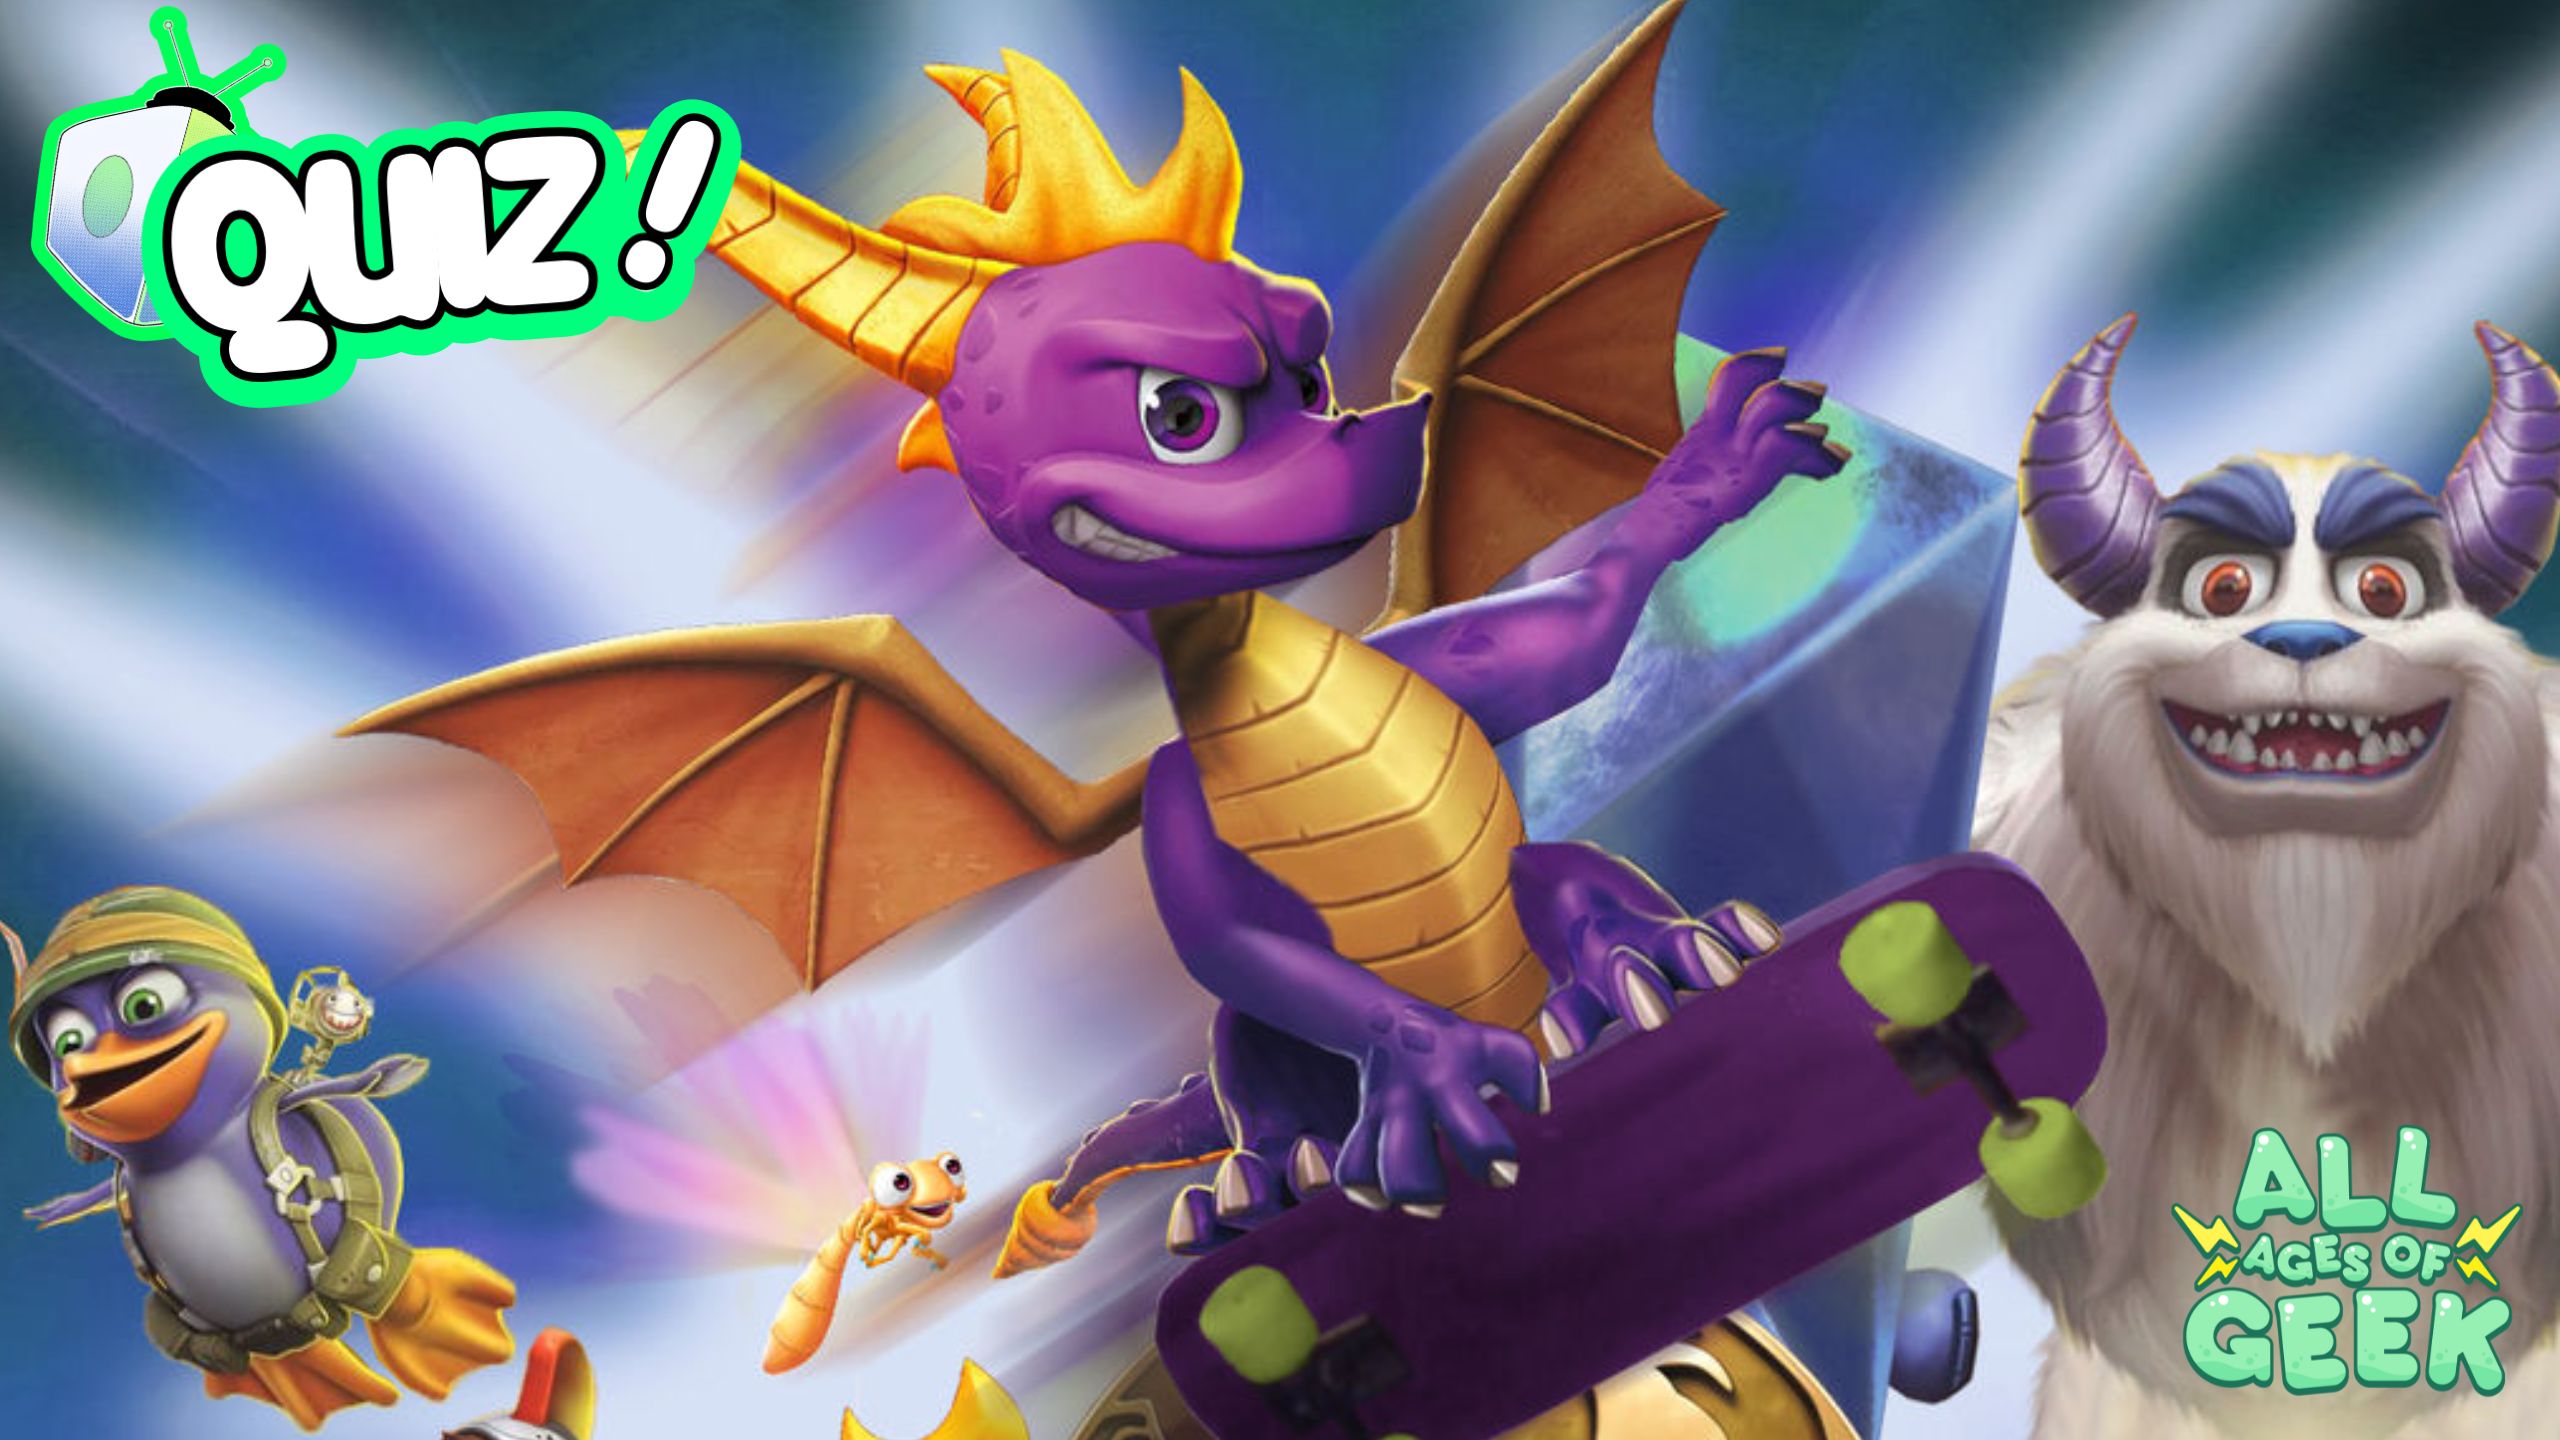 spyro is riding a skateboard for the quiz on All Ages of Geek